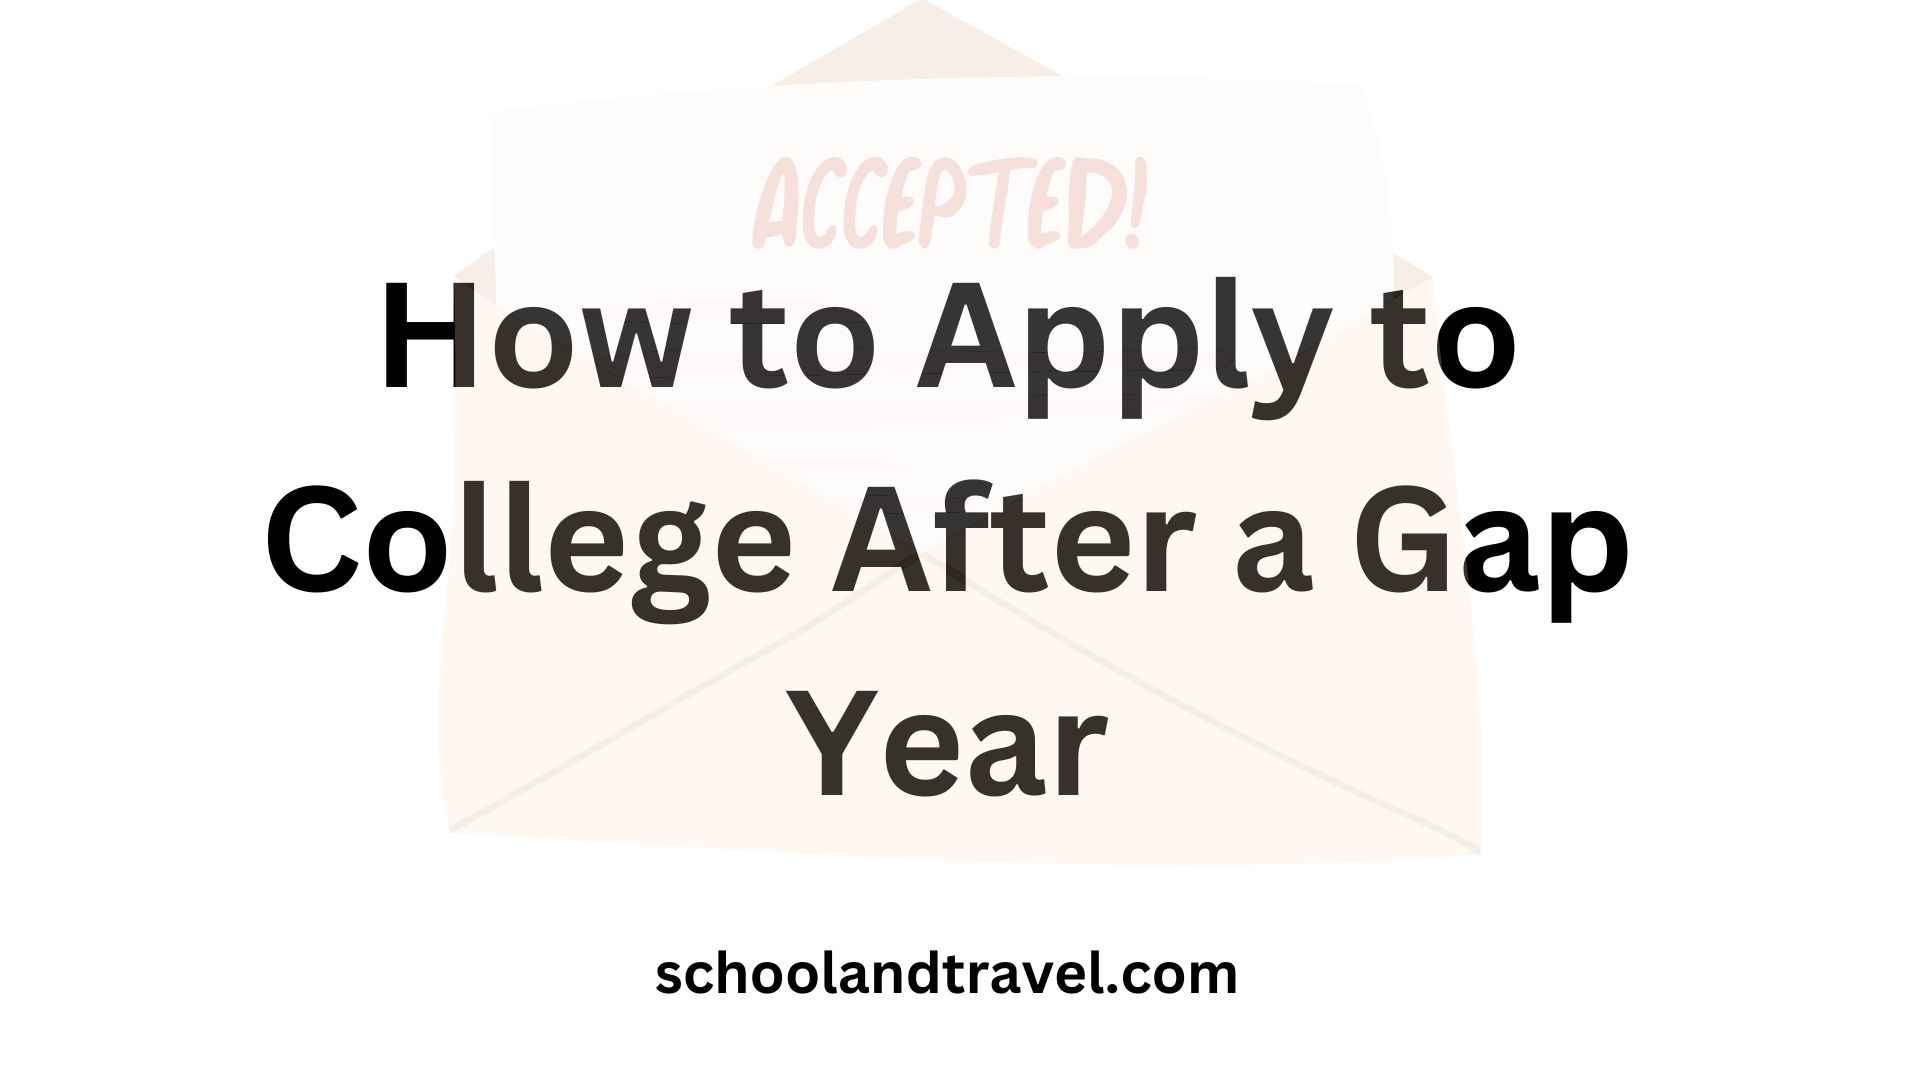 Apply to College After a Gap Year